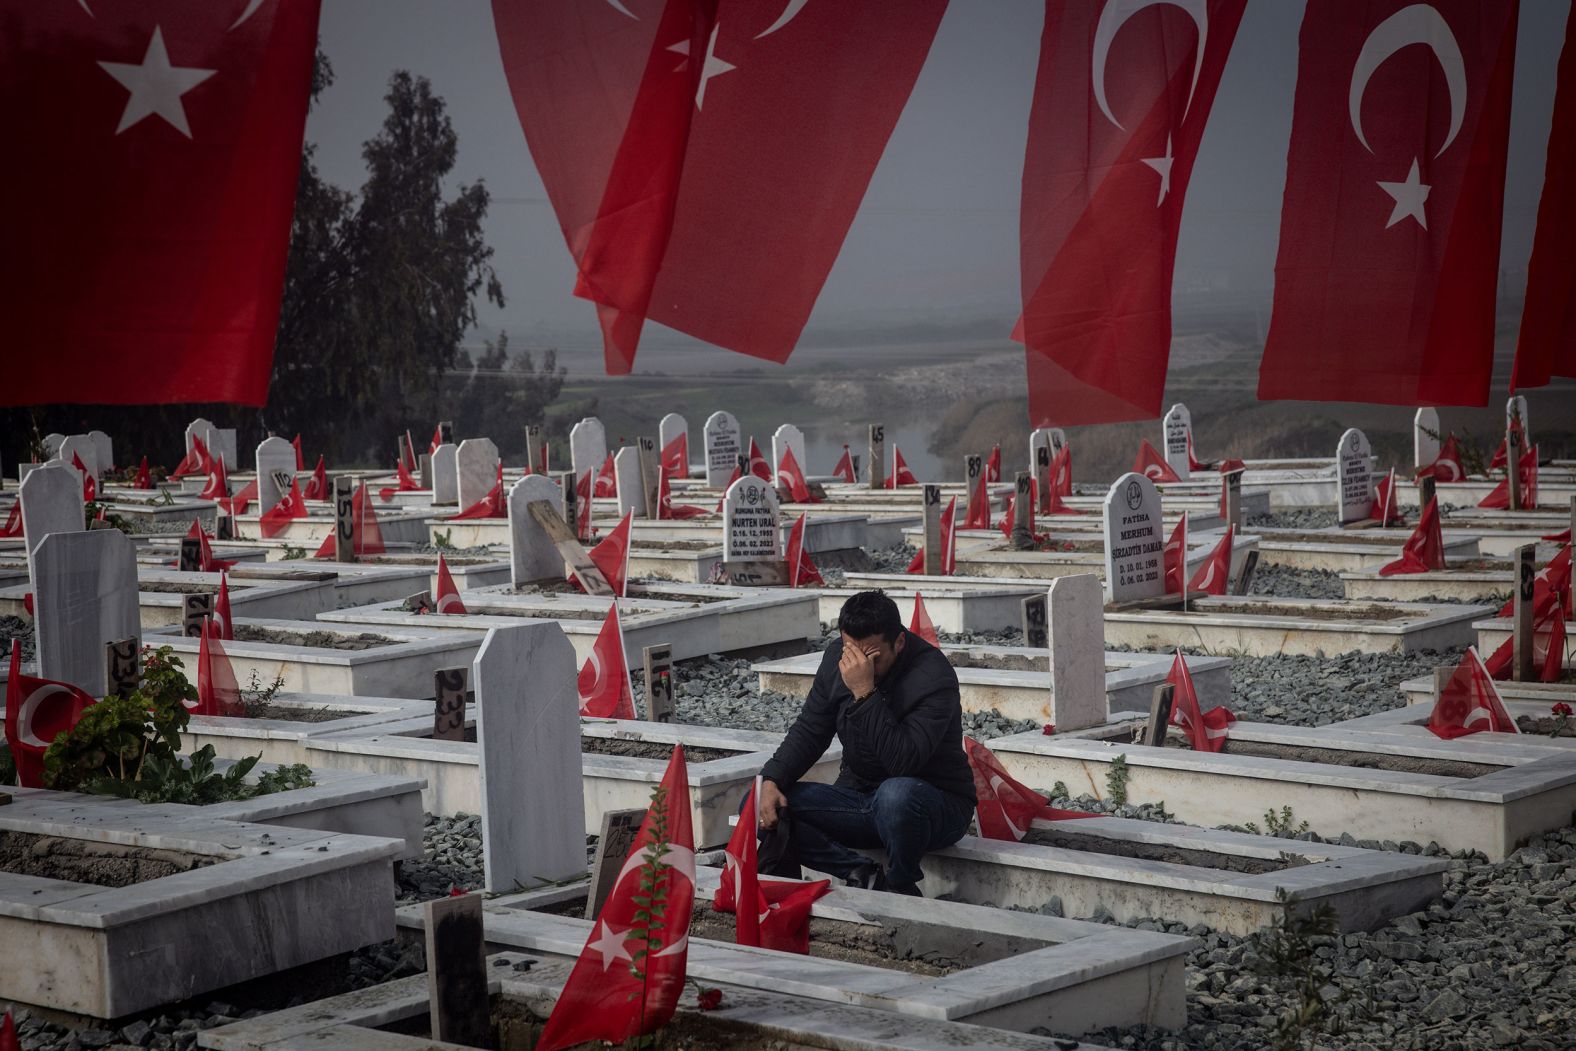 A man in Hatay, Turkey, sits in a cemetery on Tuesday, February 6, mourning a loved one who was killed in an earthquake last year. <a href="index.php?page=&url=http%3A%2F%2Fwww.cnn.com%2F2023%2F02%2F06%2Fworld%2Fgallery%2Fearthquake-turkey-syria-2023%2Findex.html">The earthquake</a> killed more than 50,000 people in Turkey and thousands more in neighboring Syria.